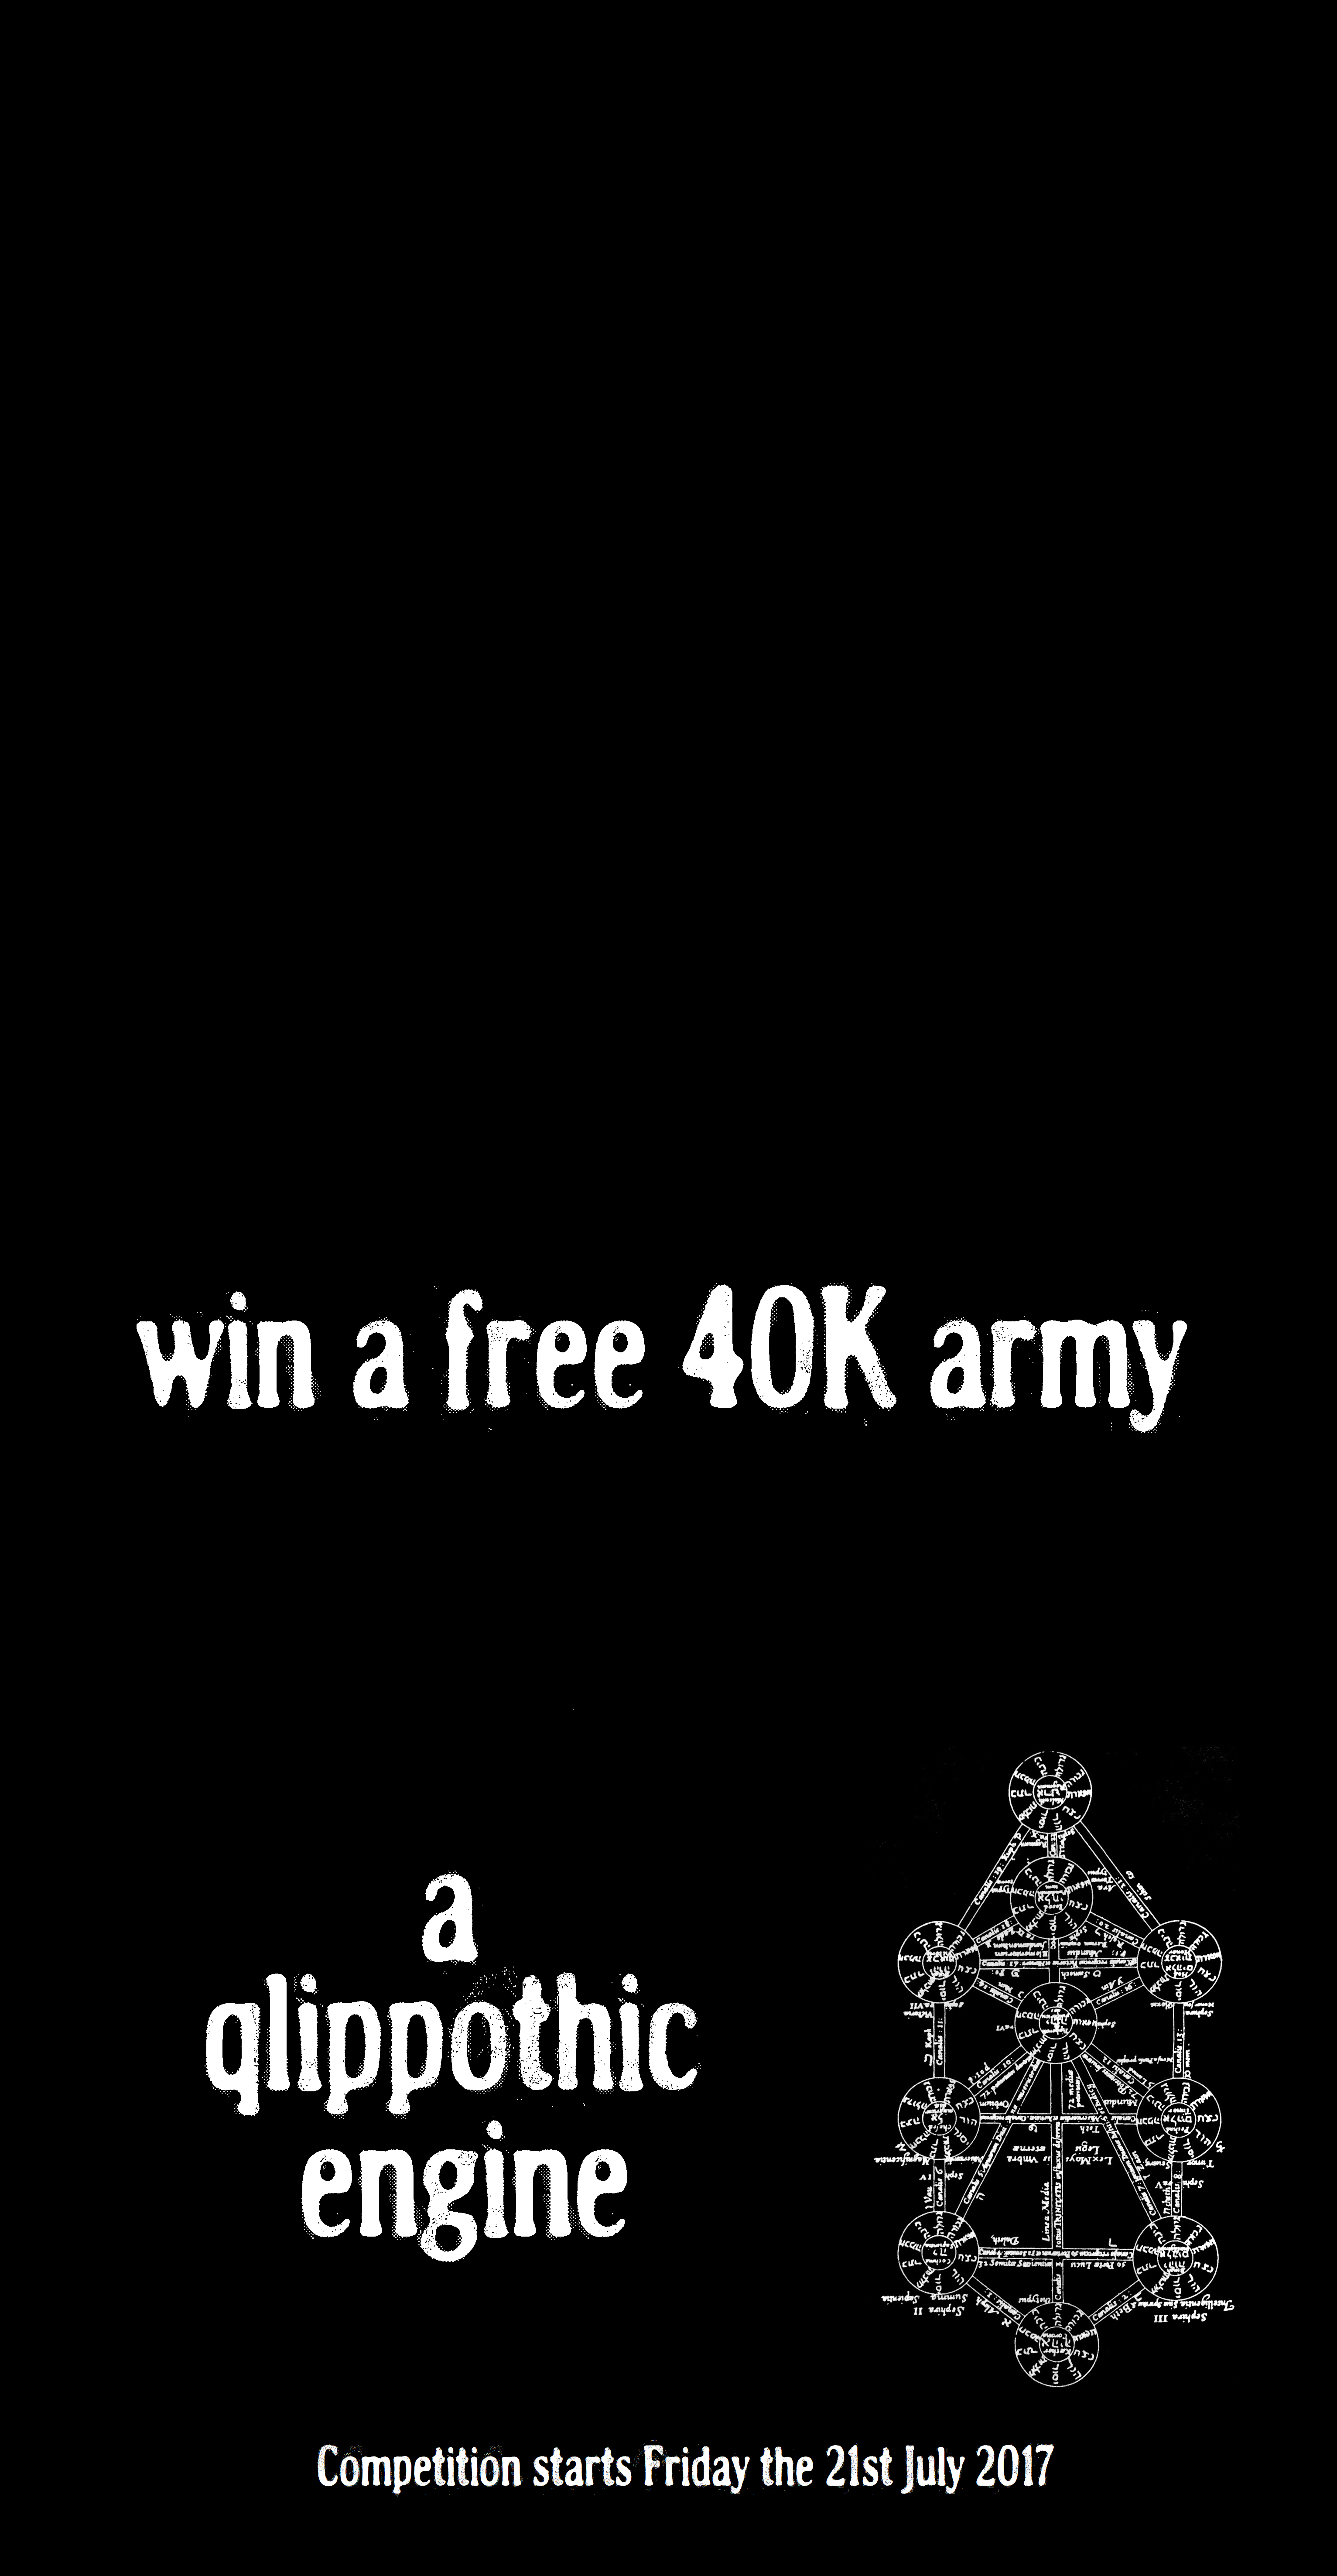 Get a FREE BOOK and possibly win a 40K army!